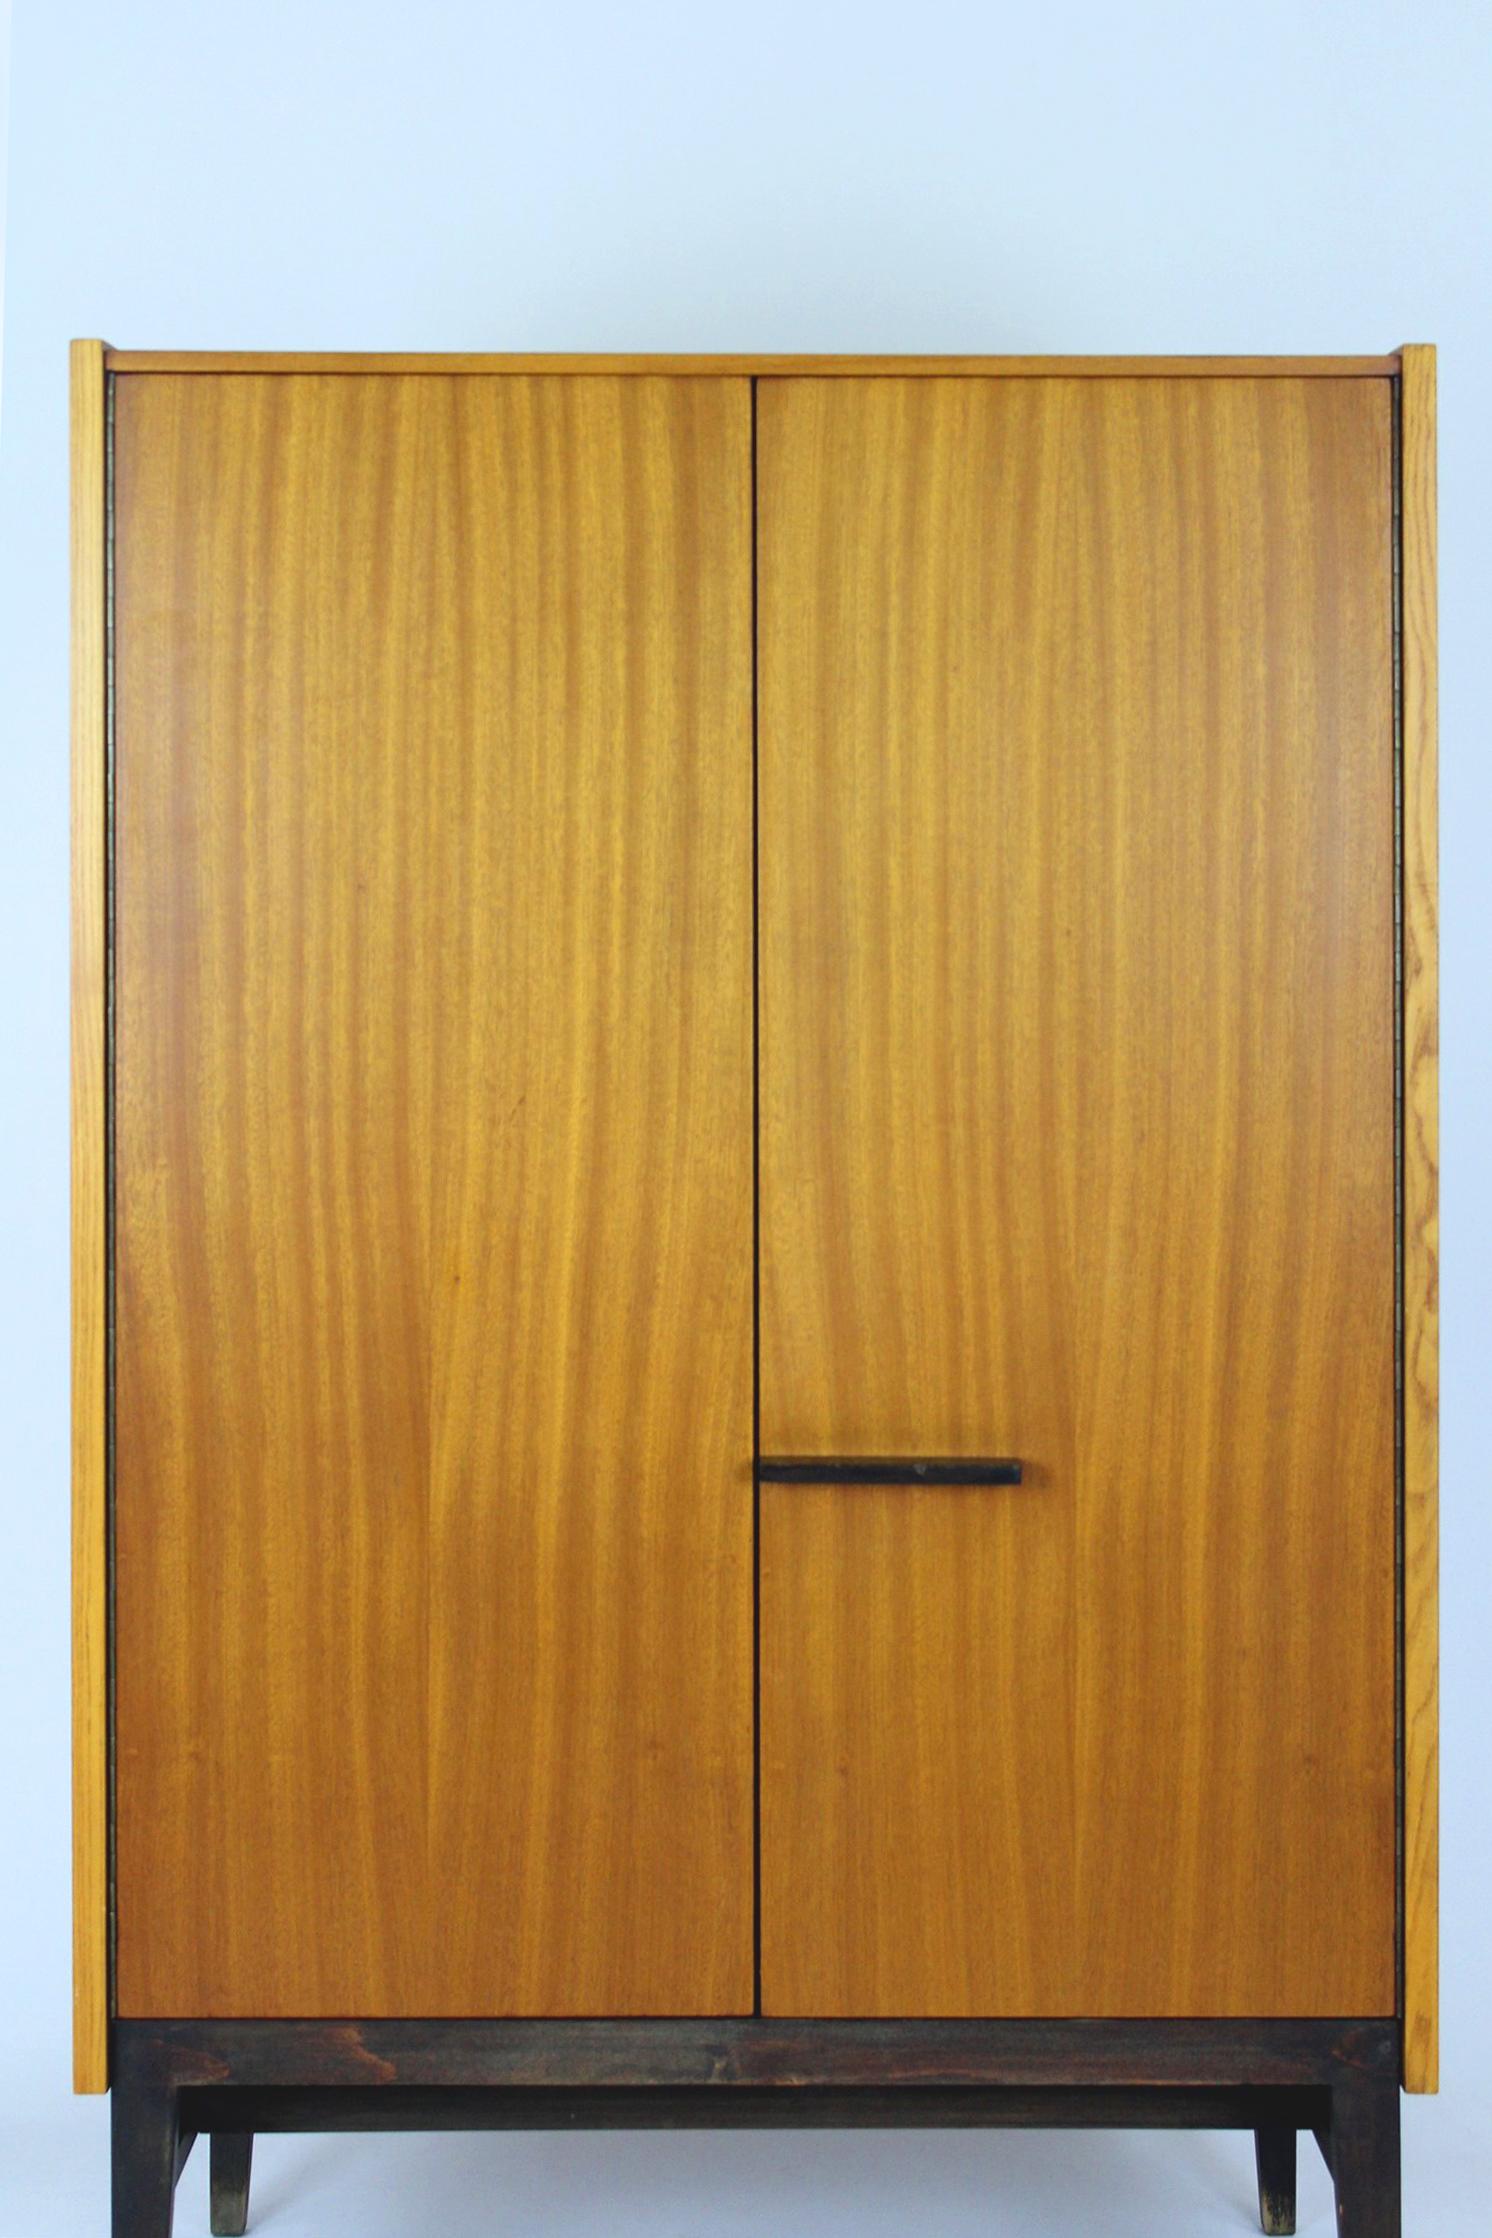 This ash & mahogany wardrobe was manufactured in 1970 by UP Zavody in Czechoslovakia. It has 4 shelves and 2 drawers. The wardrobe is preserved in its original, very good condition.
We have more furniture from this set (desk, 2 sideboard, bookcase),